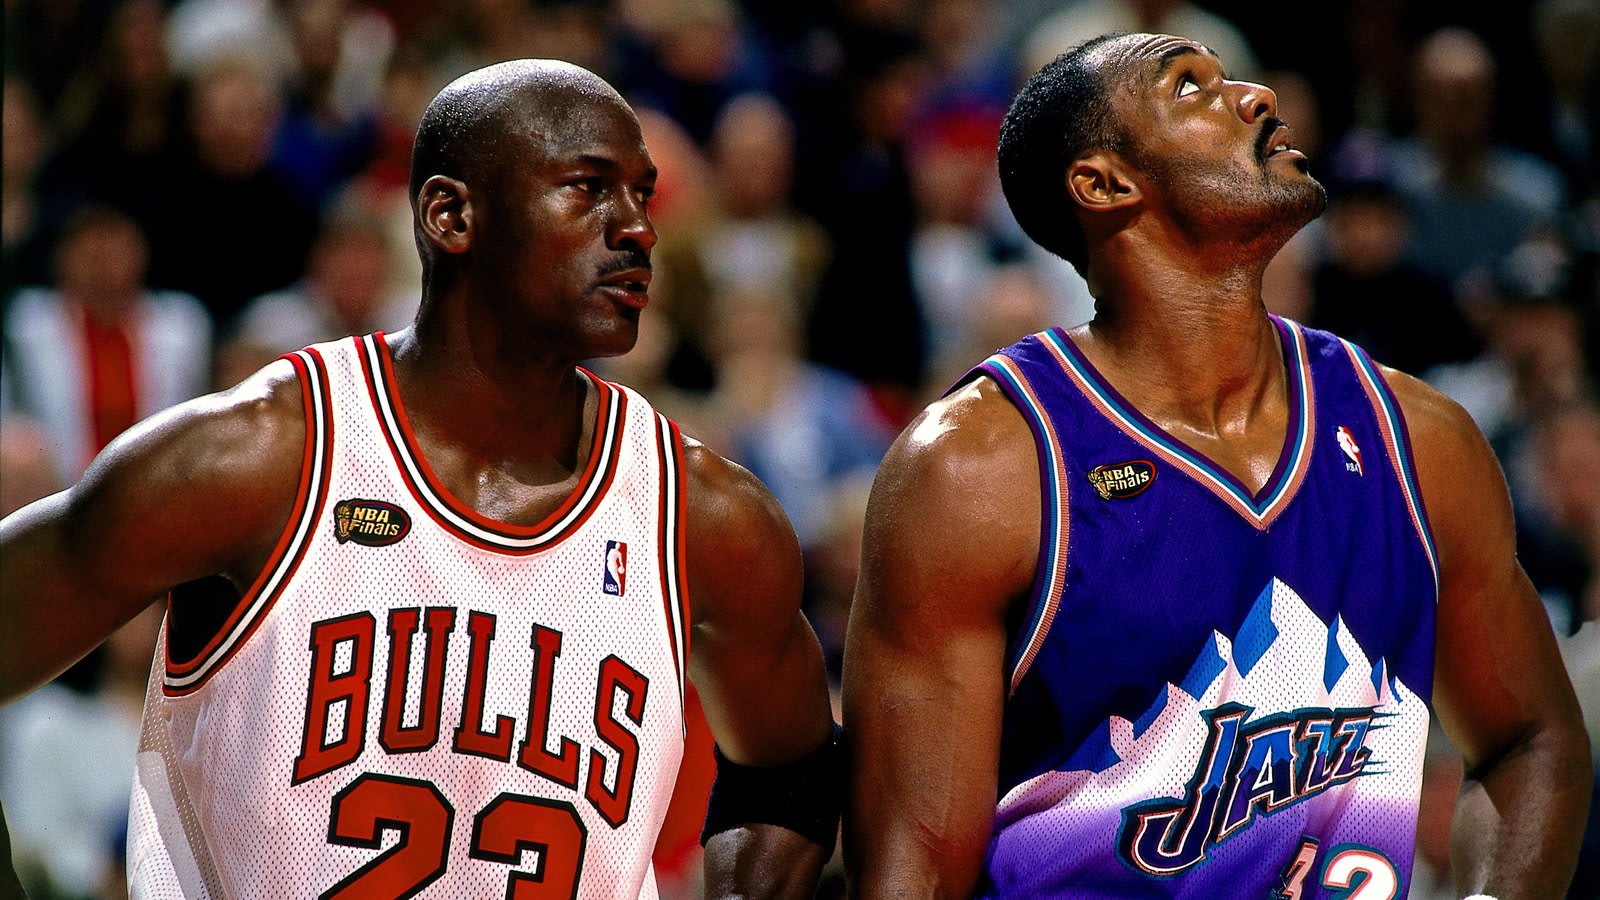 The greatest NBA Finals rivalries